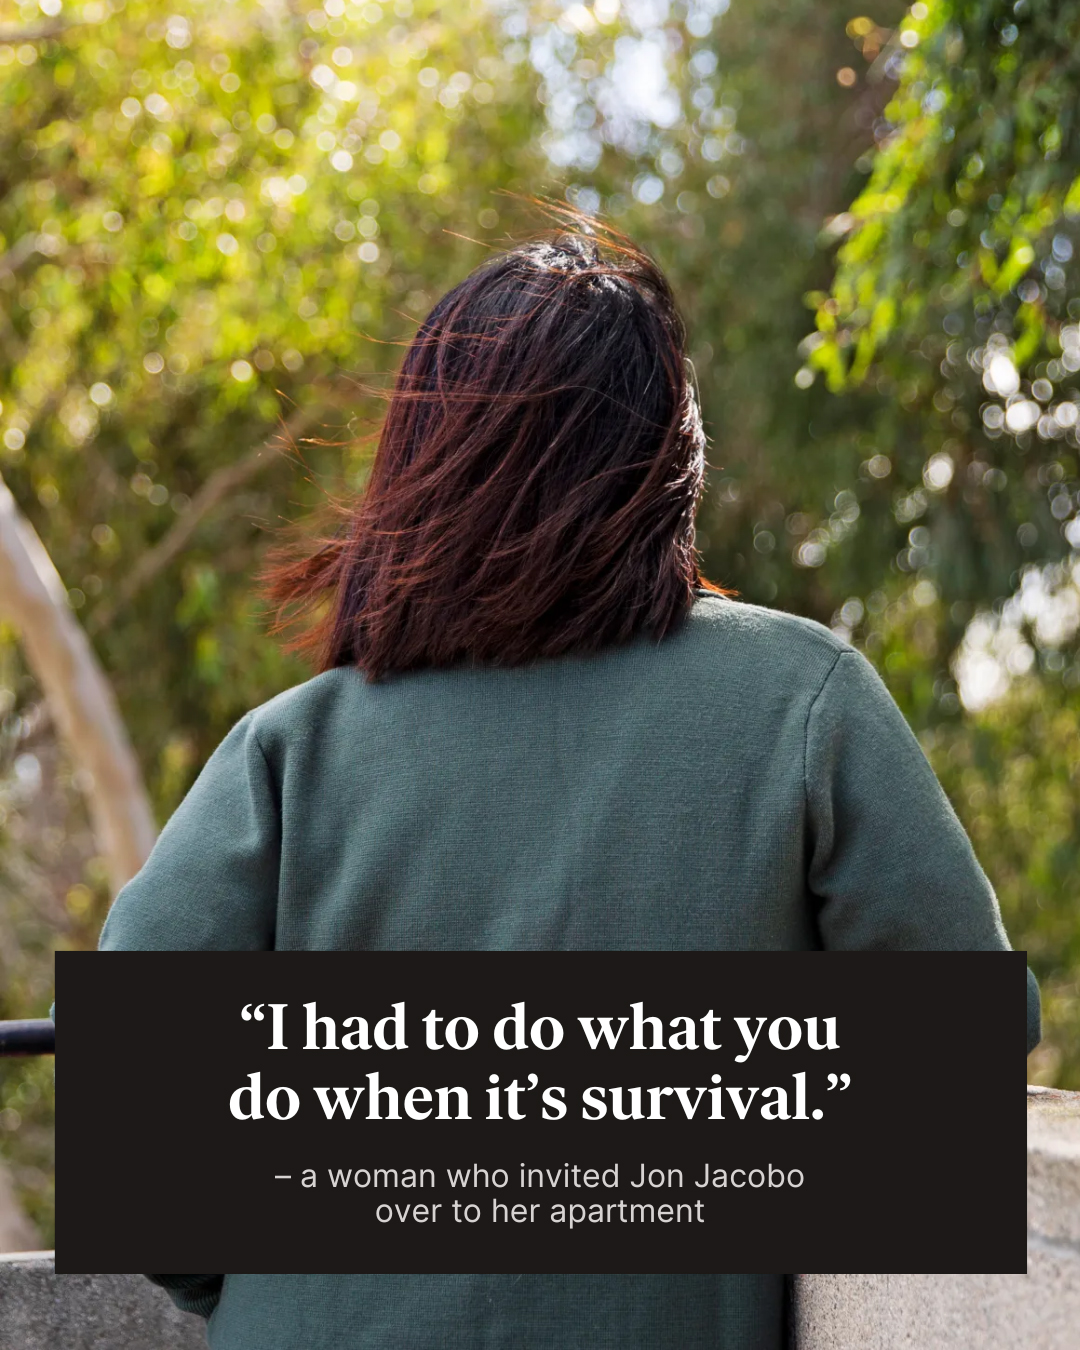 A woman is seen from behind, looking at trees, with a quote about survival on the image.